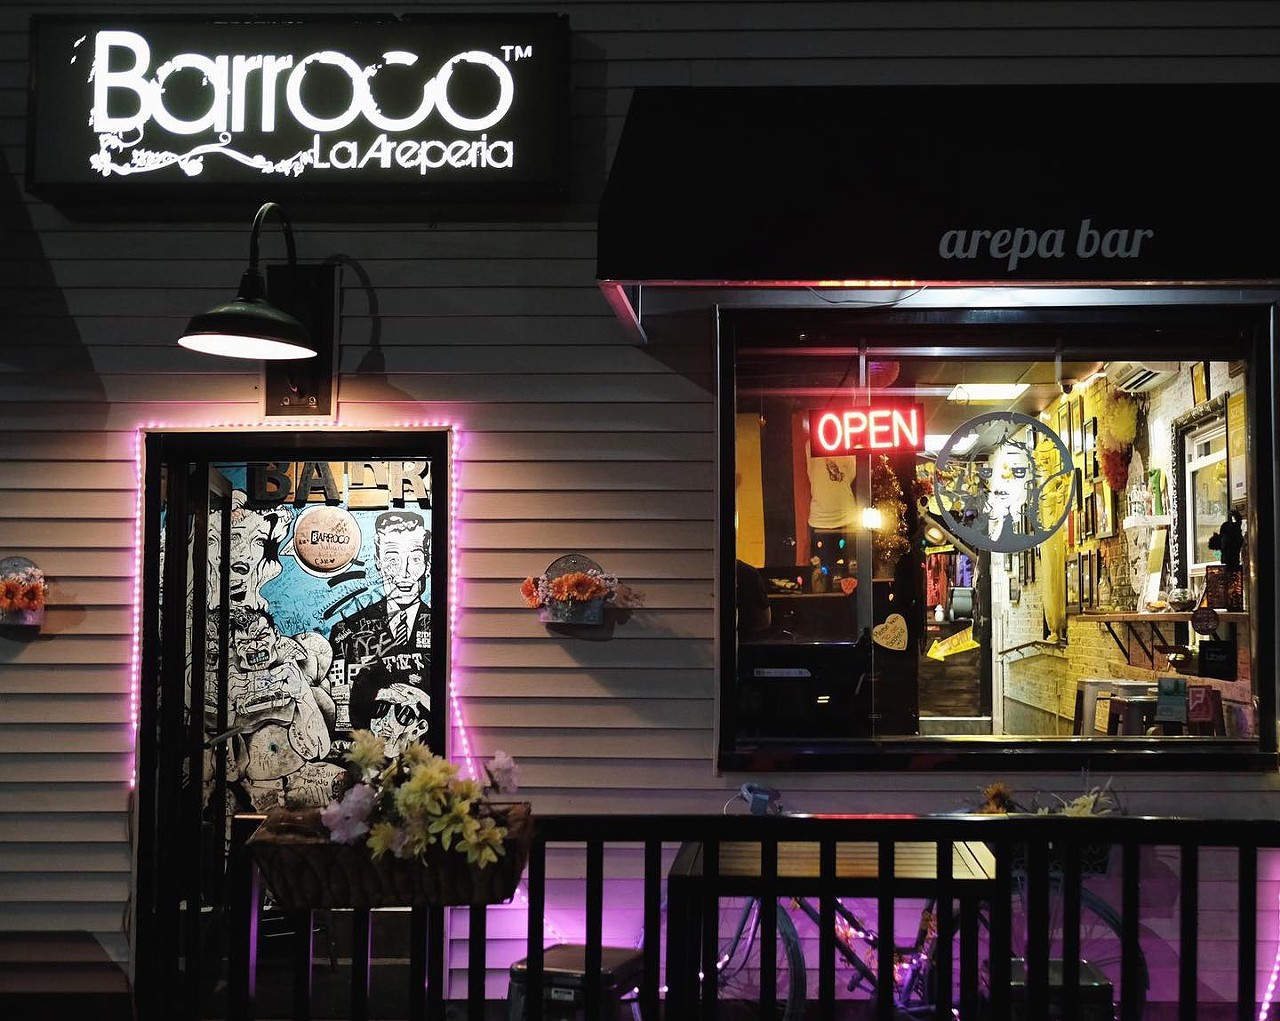  Barroco 
12906 Madison Ave., Lakewood, 287 Crocker Park Blvd., Westlake and 3941 Erie St. 2nd Level, Willoughby
If you’ve never had an arepa before, you need to head to Barroco ASAP. Arepas, which hail from Colombia and Venezuela, are grilled white tortilla’s stuffed with a variety of ingredients. The ‘La Gringa’, stuffed with braised beef, feta cheese, avocado, chimichurri, greens and mozzarella, and the ‘Buffalo Chicken’ arepa are two of our absolute favorites. Barrocco also has fantastic live Latin music three nights a week.